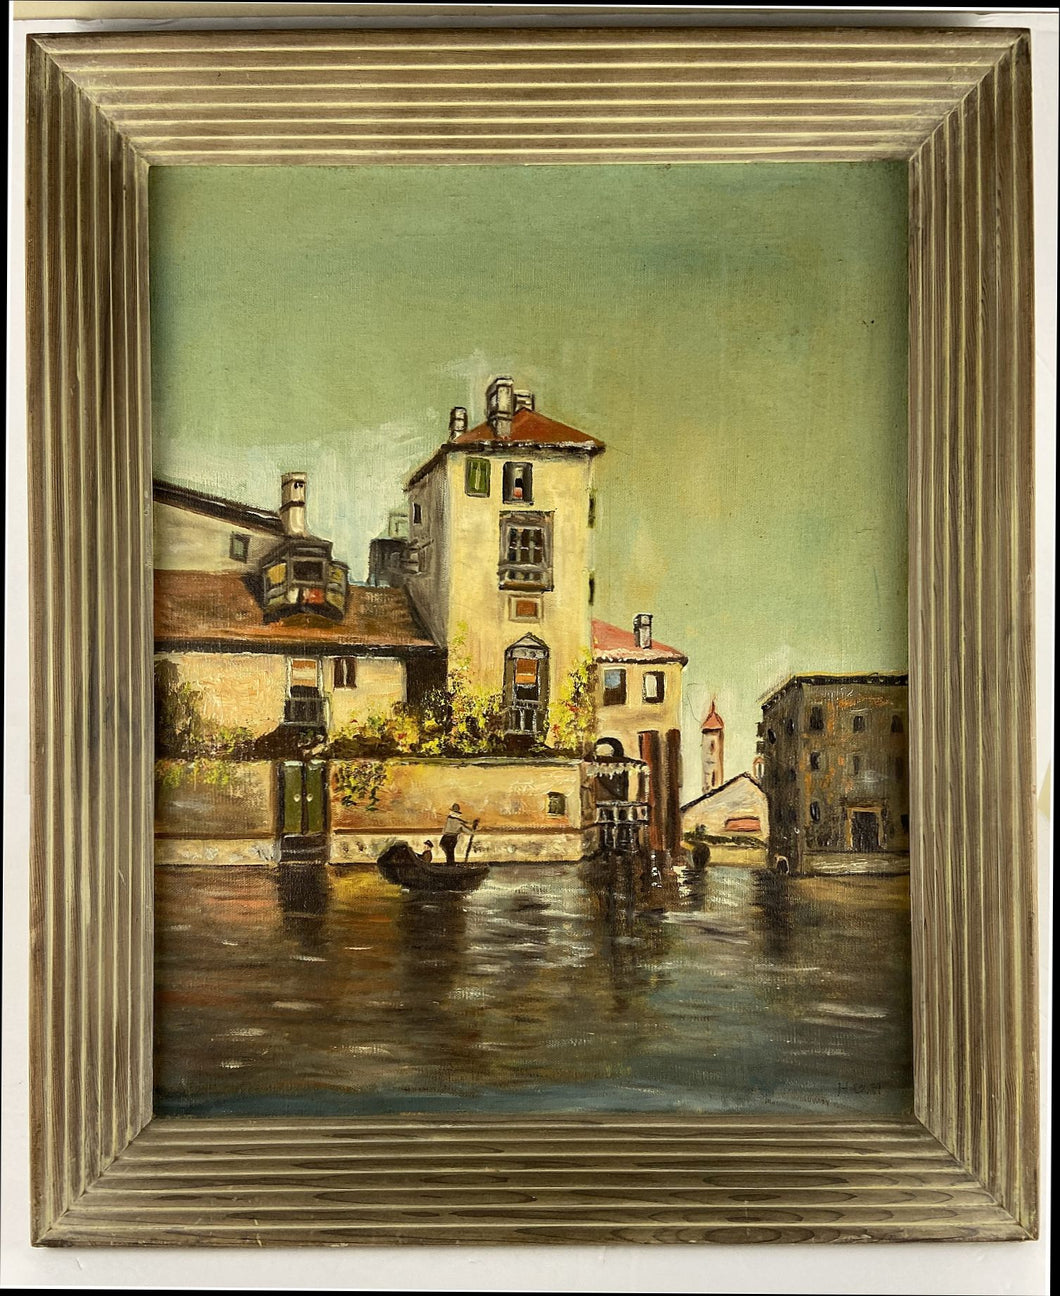 Venice Original Oil Painting on Canvas Signed Day Vintage Italian Seascape